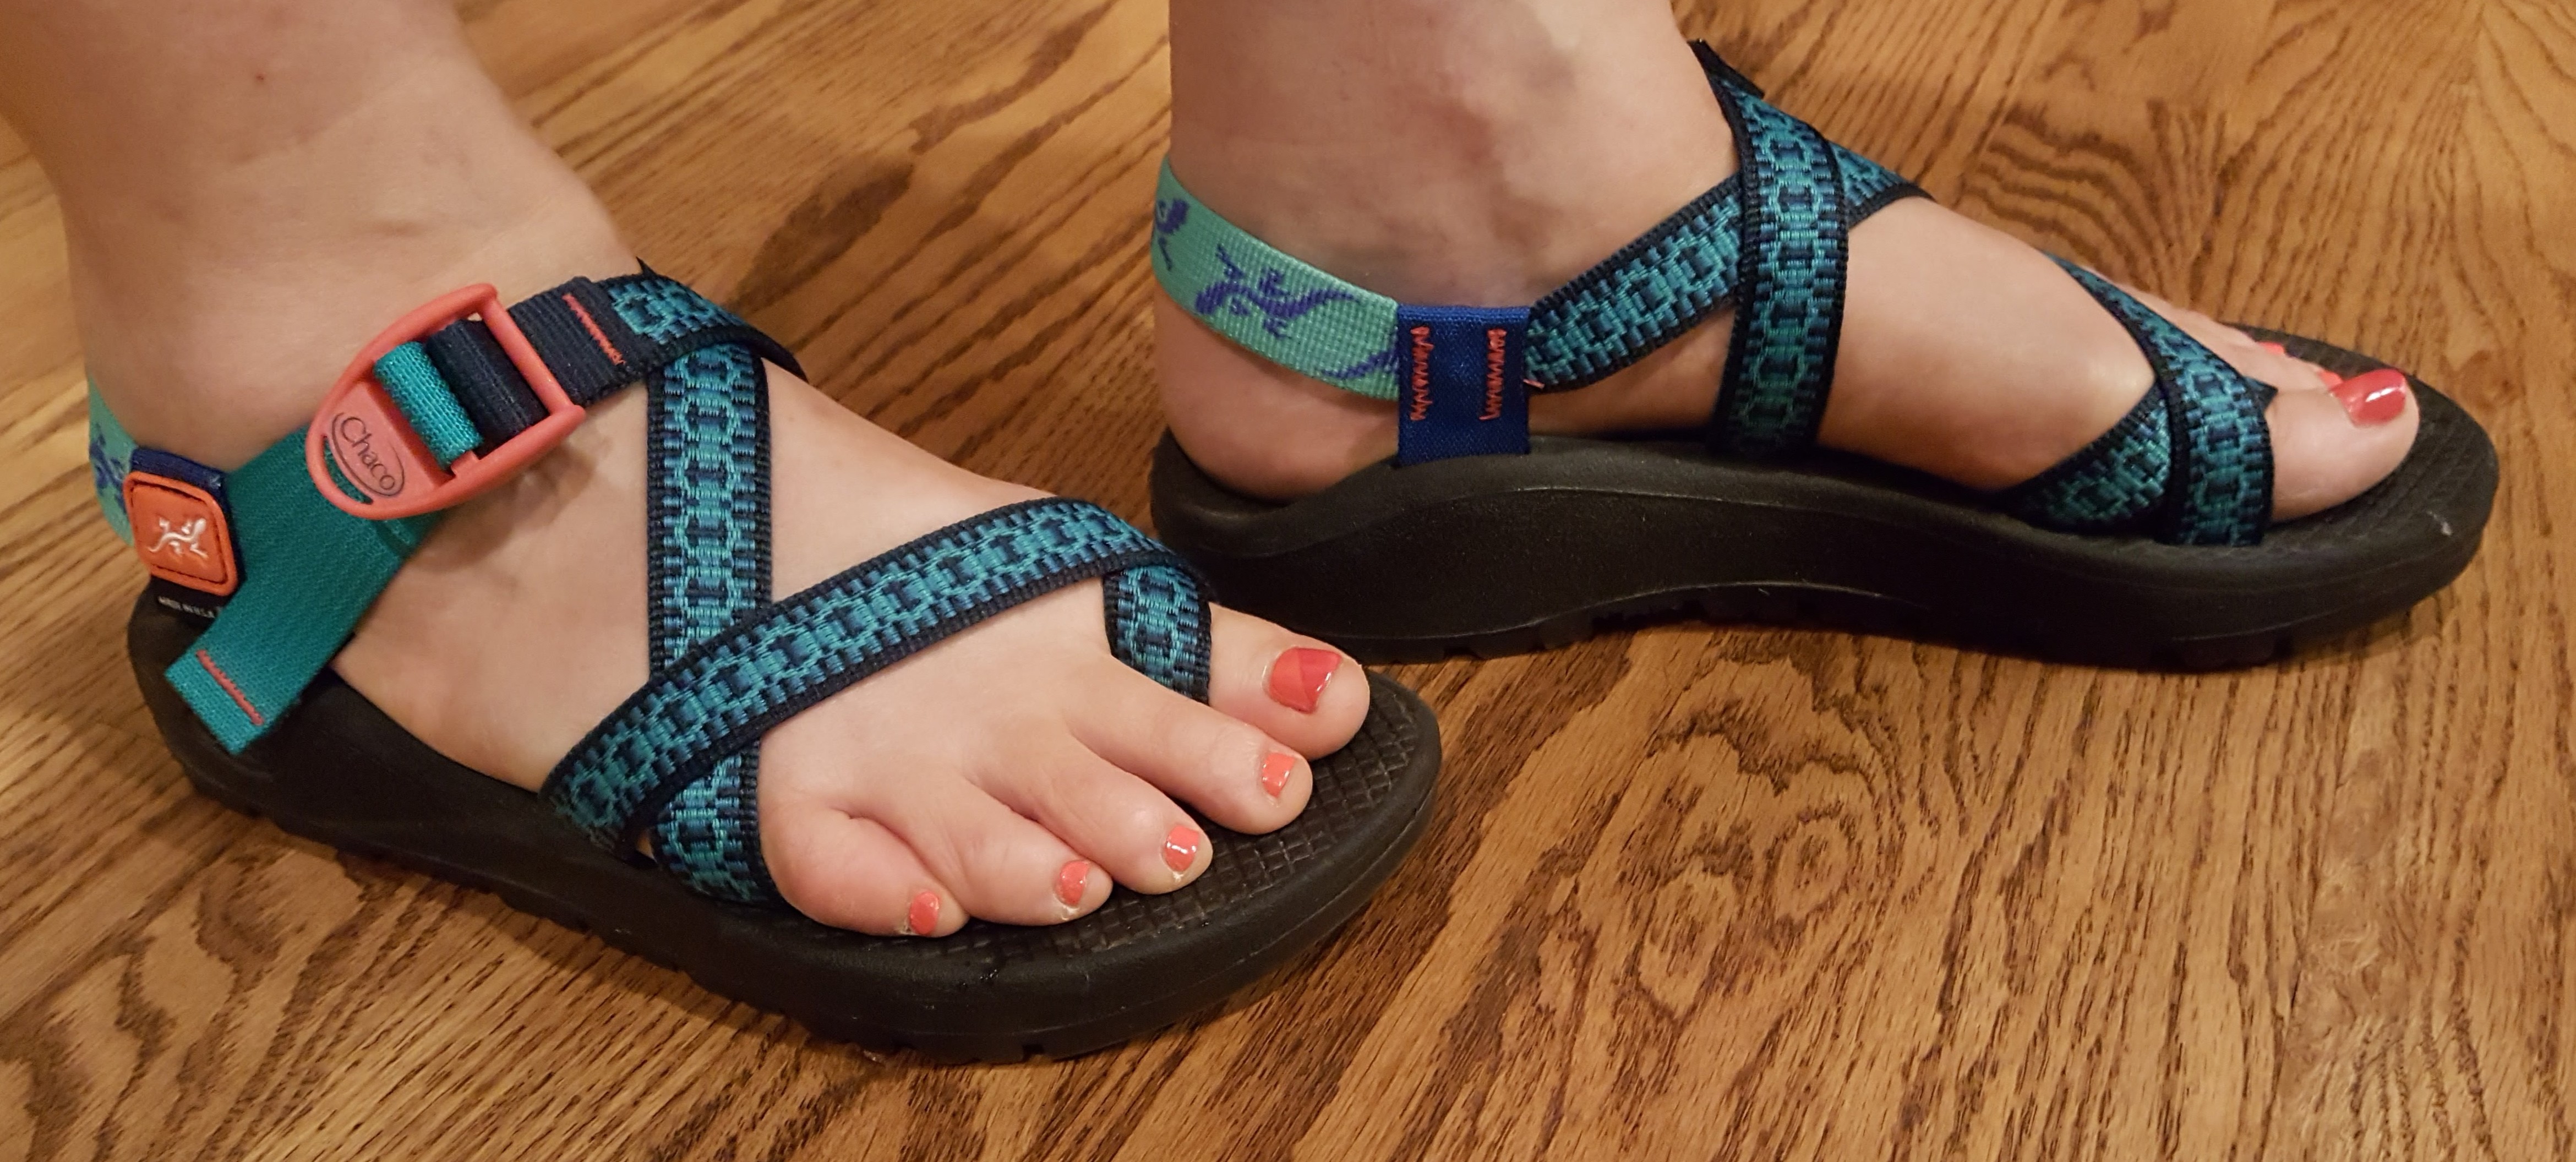 chacos and plantar fasciitis